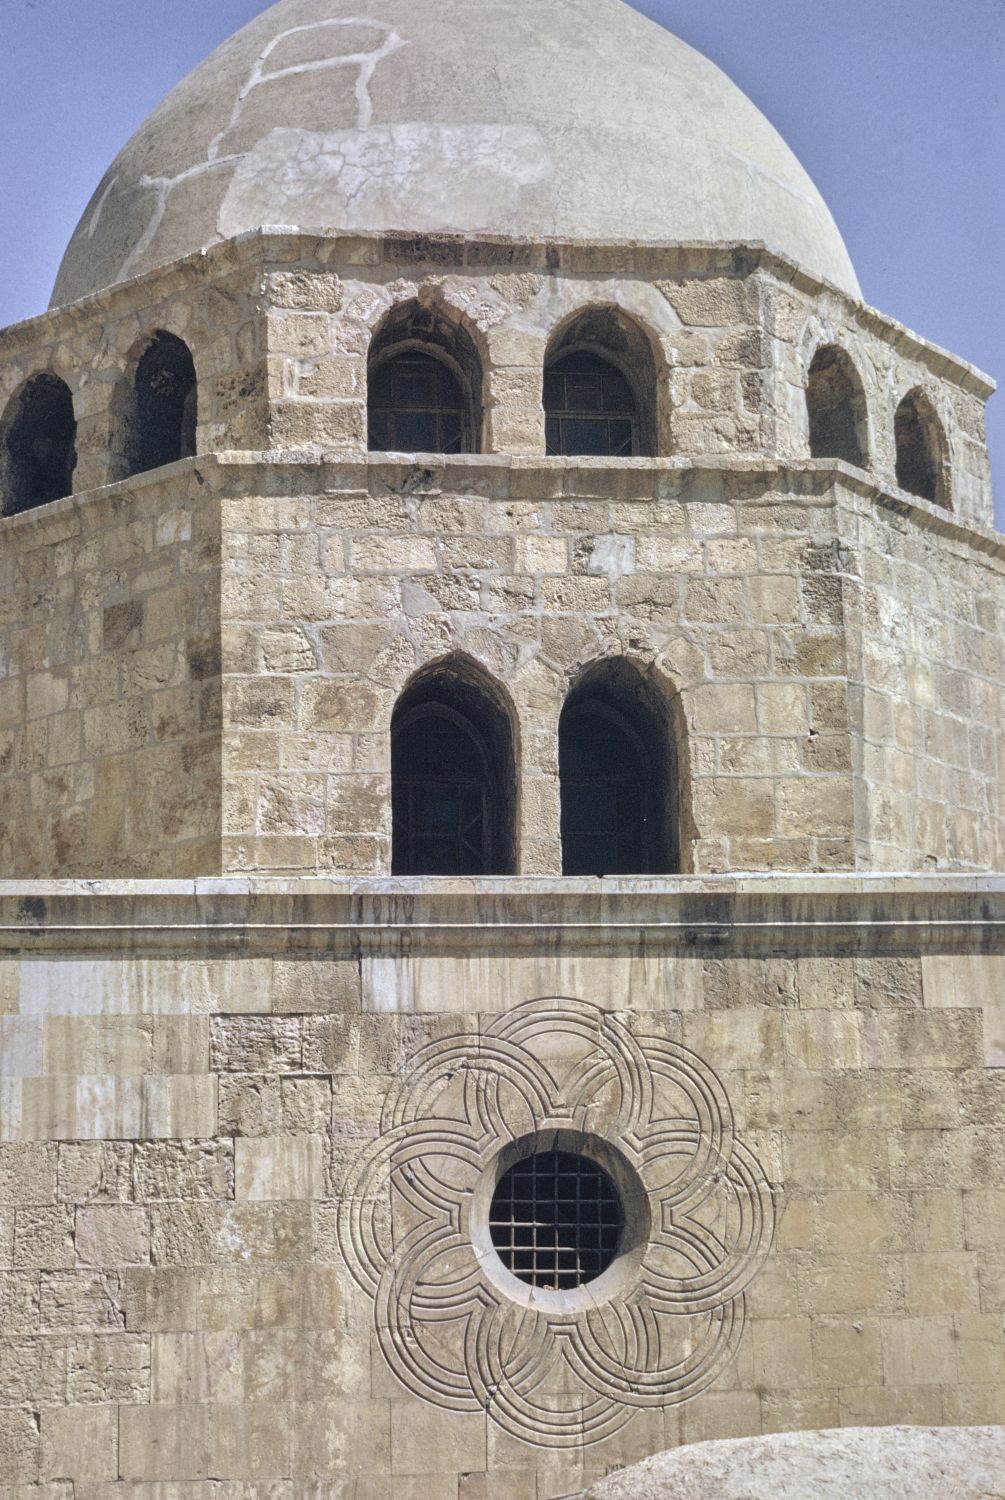 Exterior view of dome.